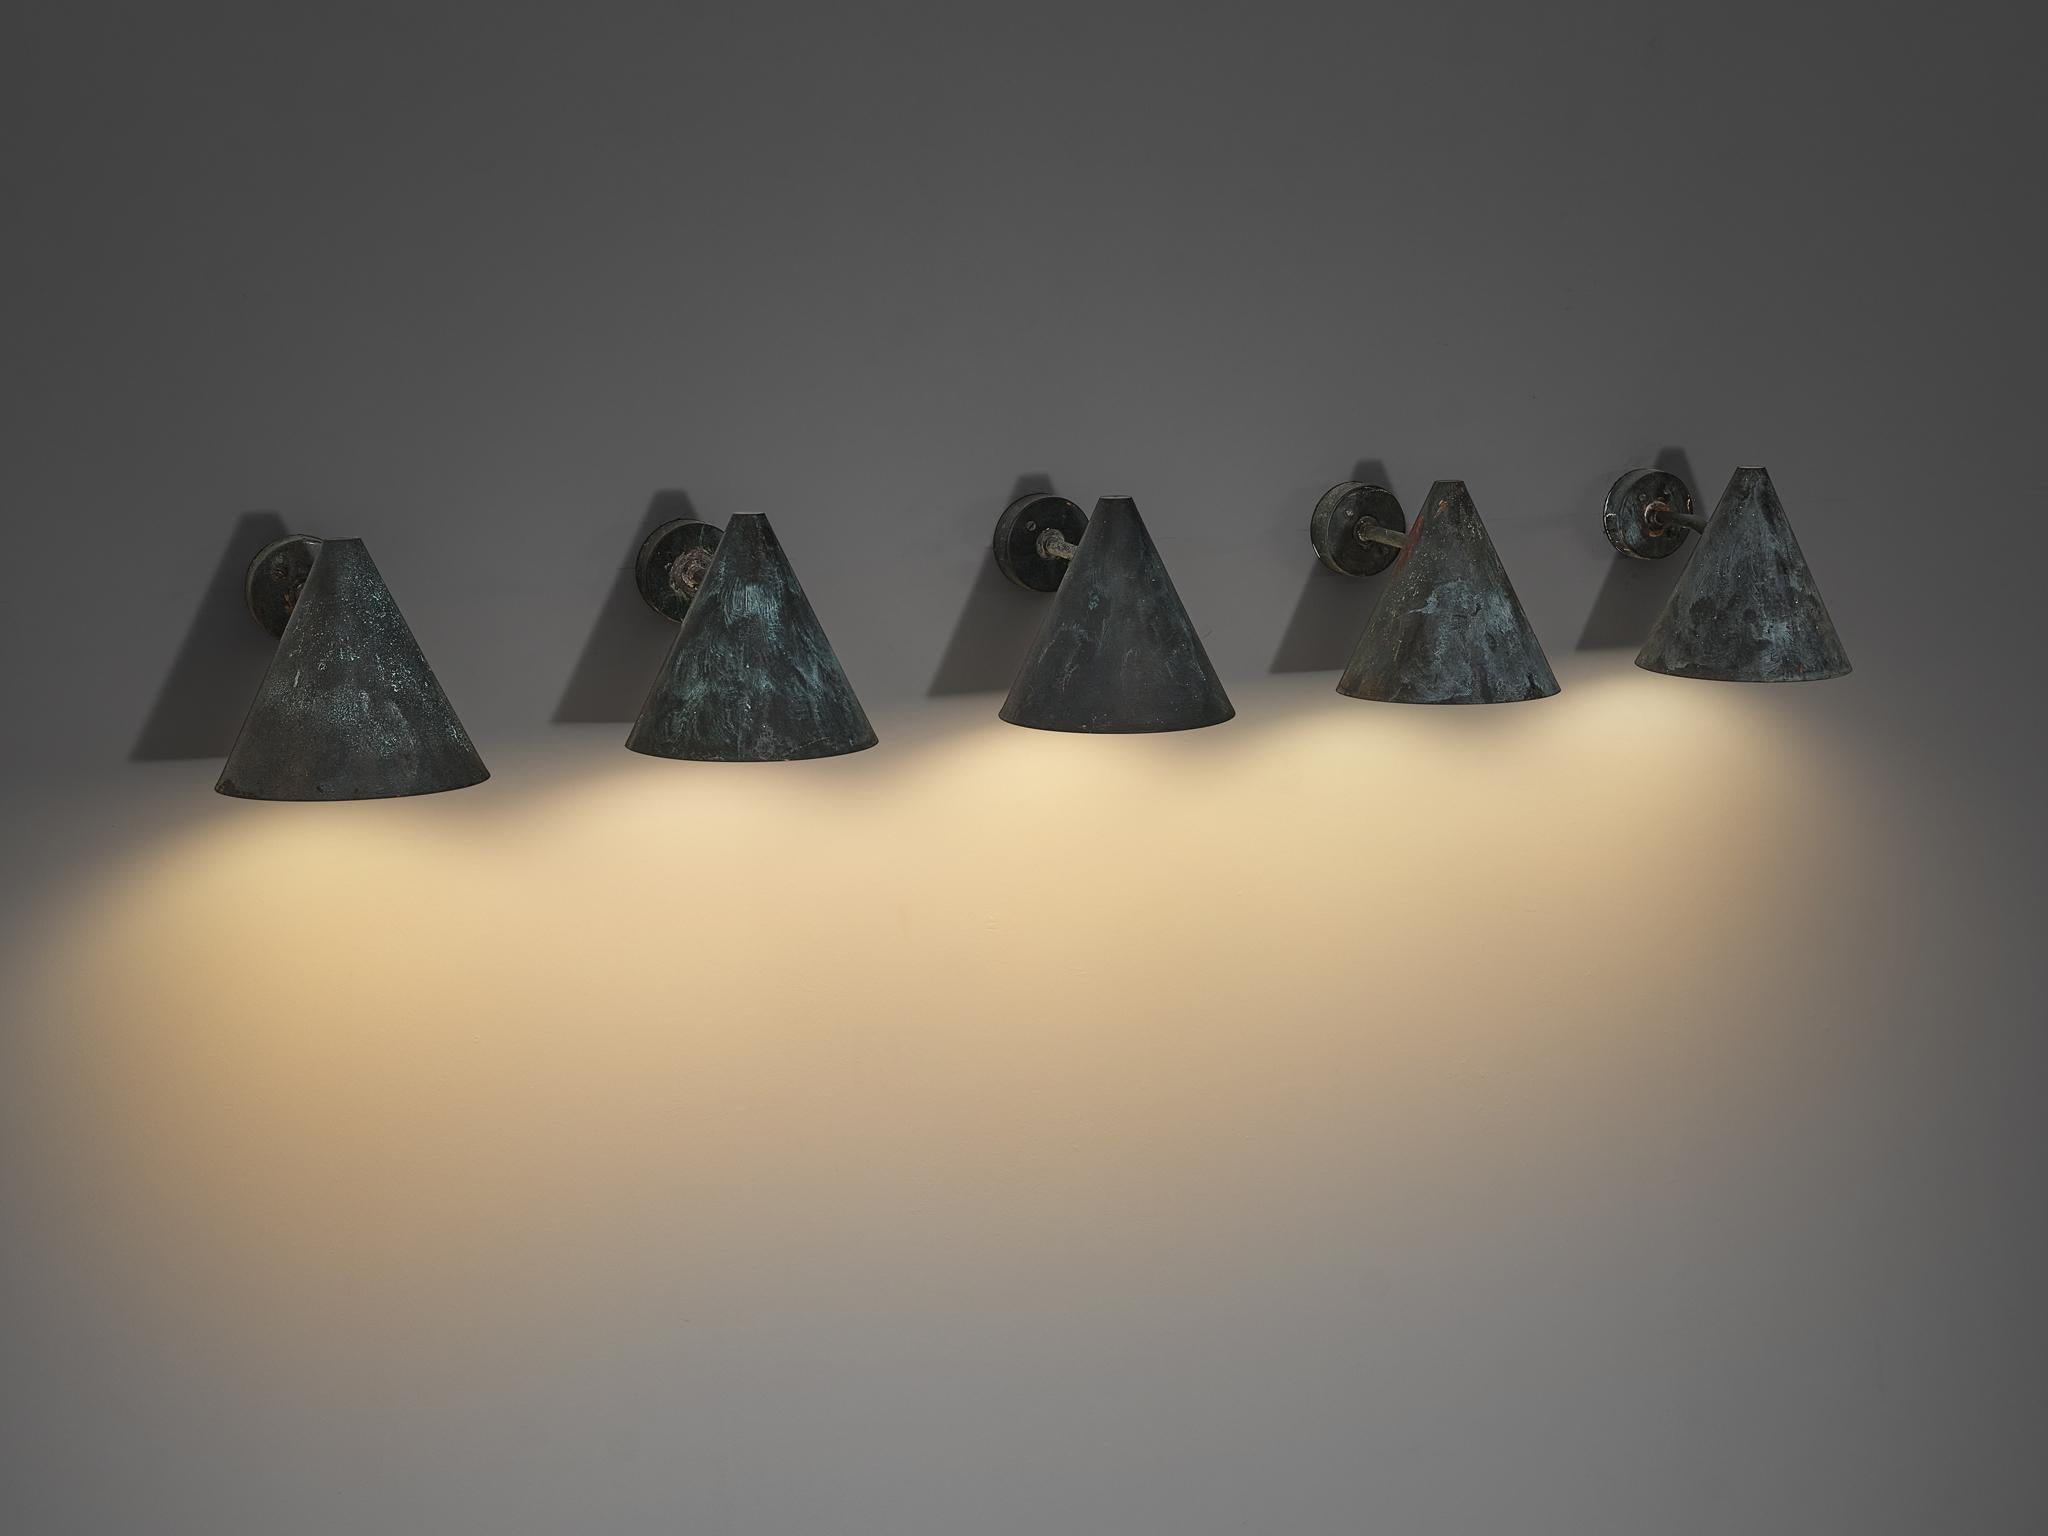  Hans-Agne Jakobsson 'Tratten' Wall Lights in Patinated Copper  For Sale 3